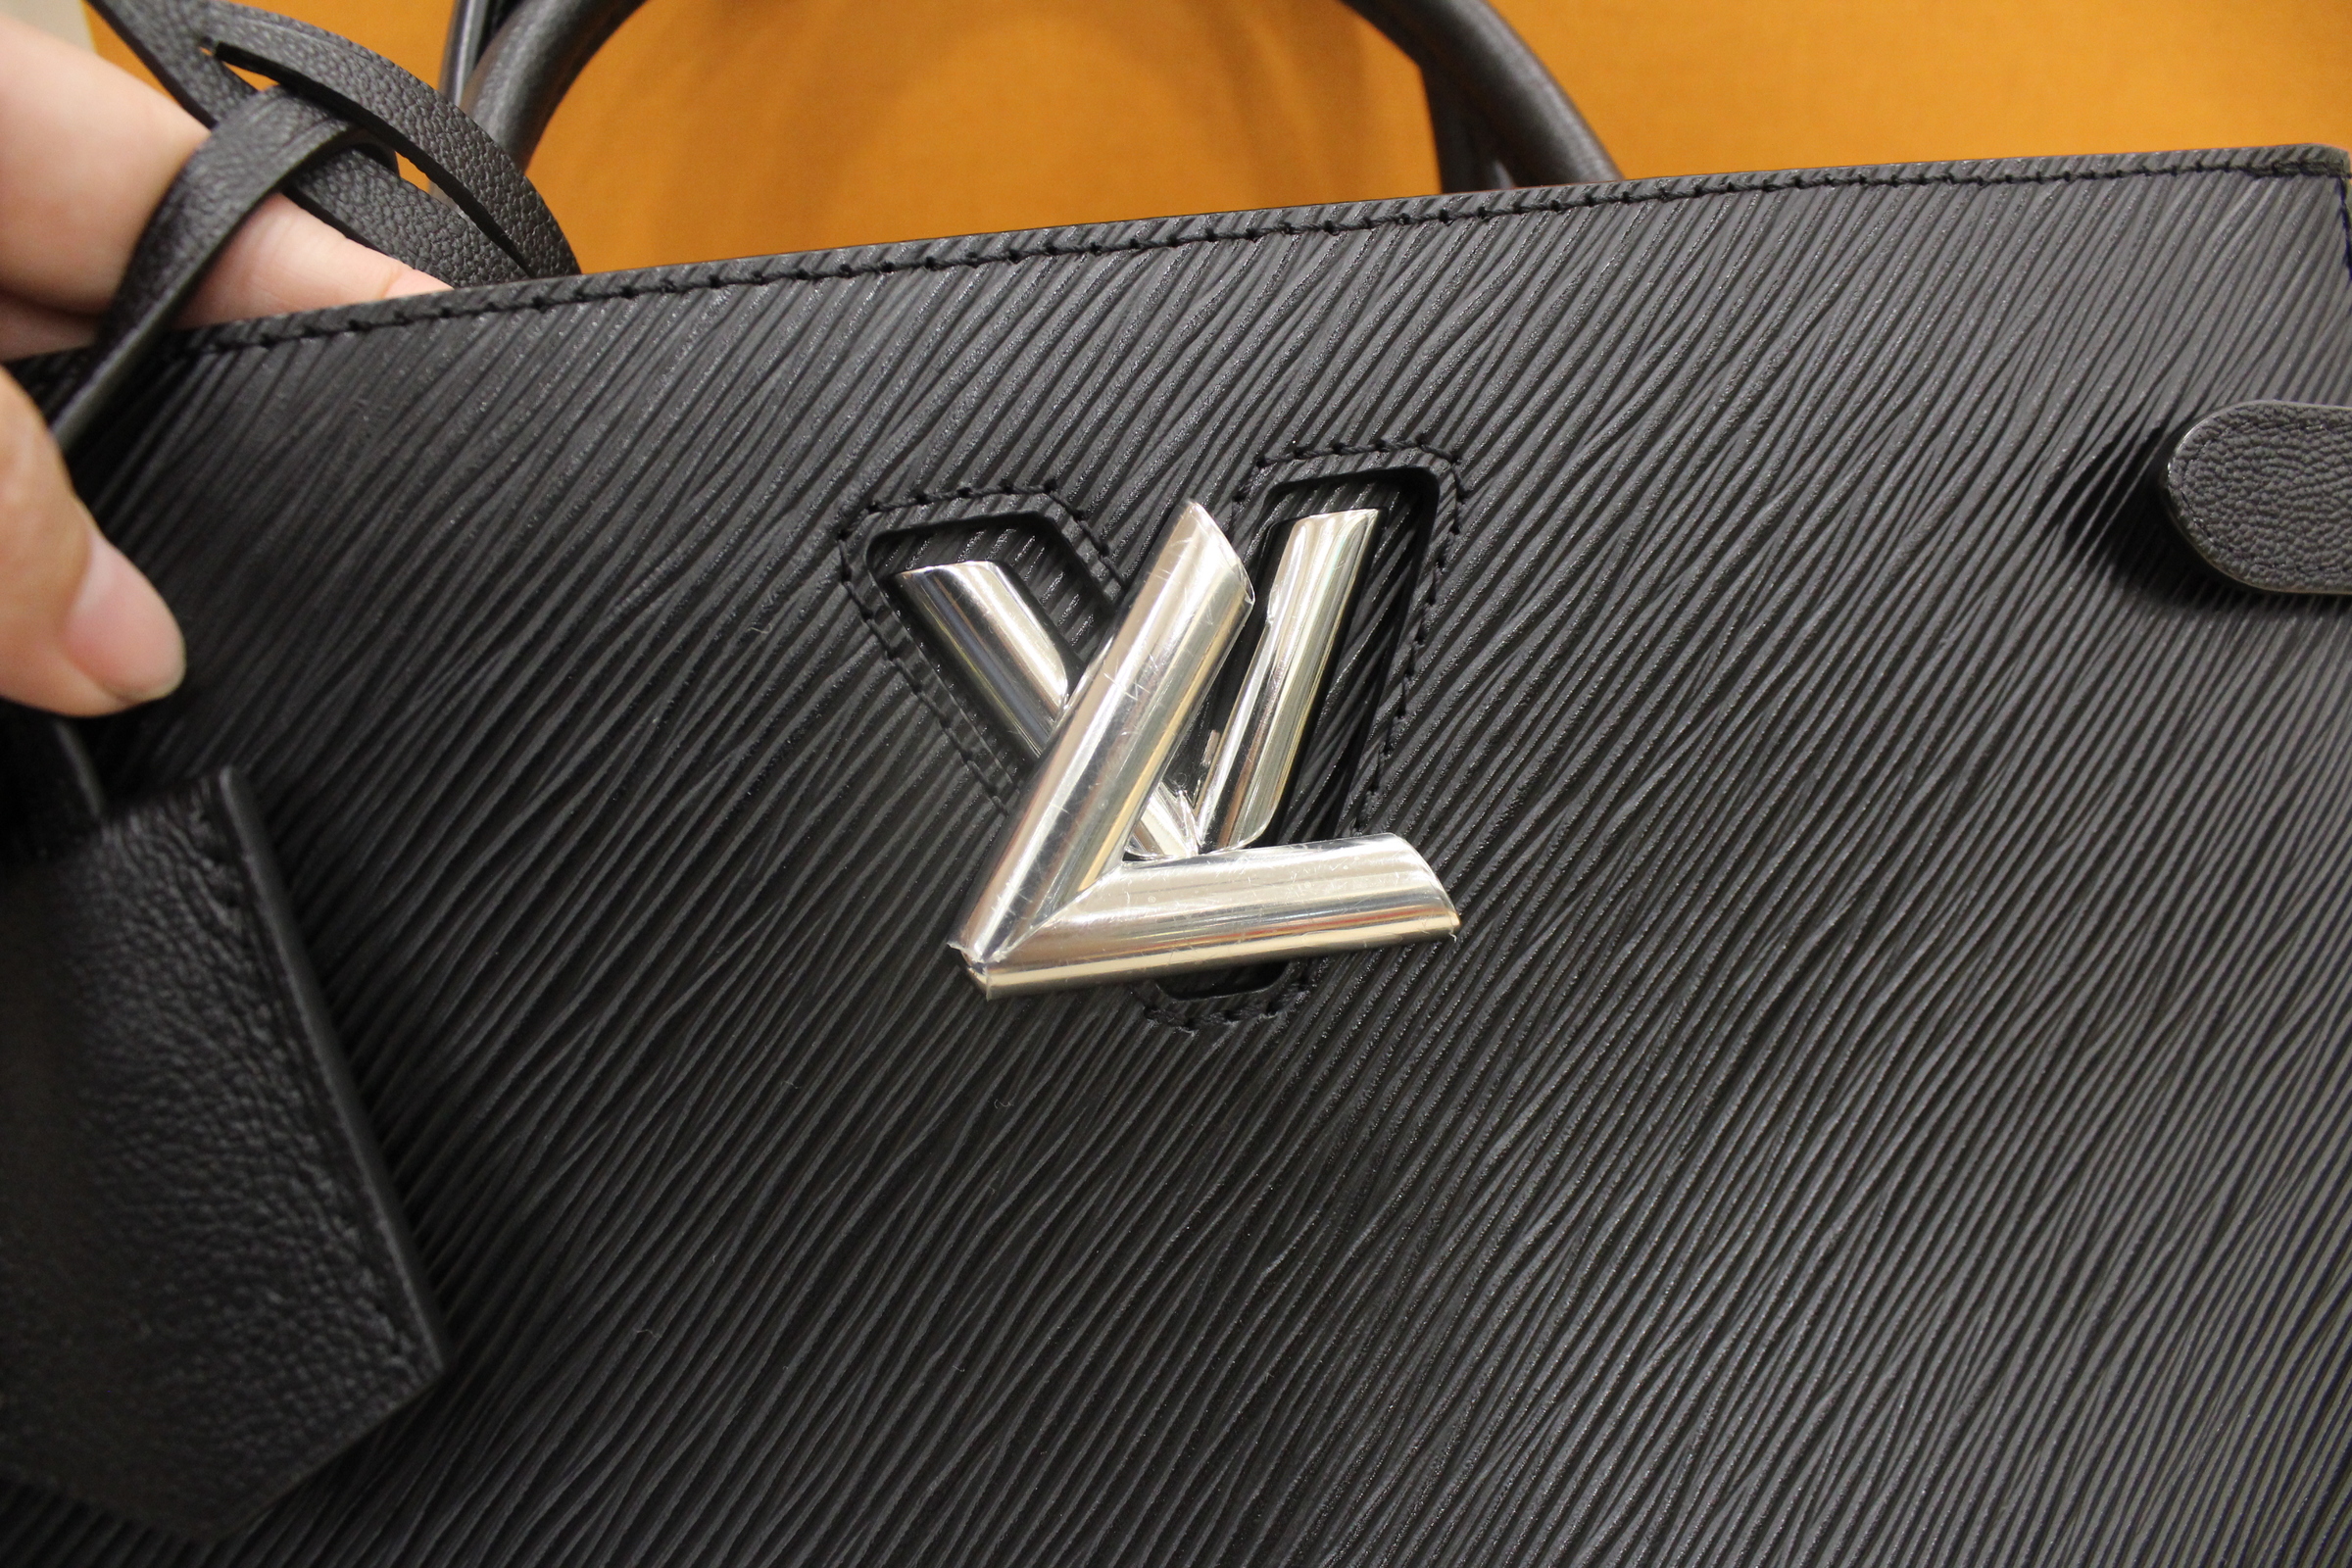 Louis Vuitton Noir Epi leather Twist Tote – My Paris Branded Station-Sell Your Bags And Get ...